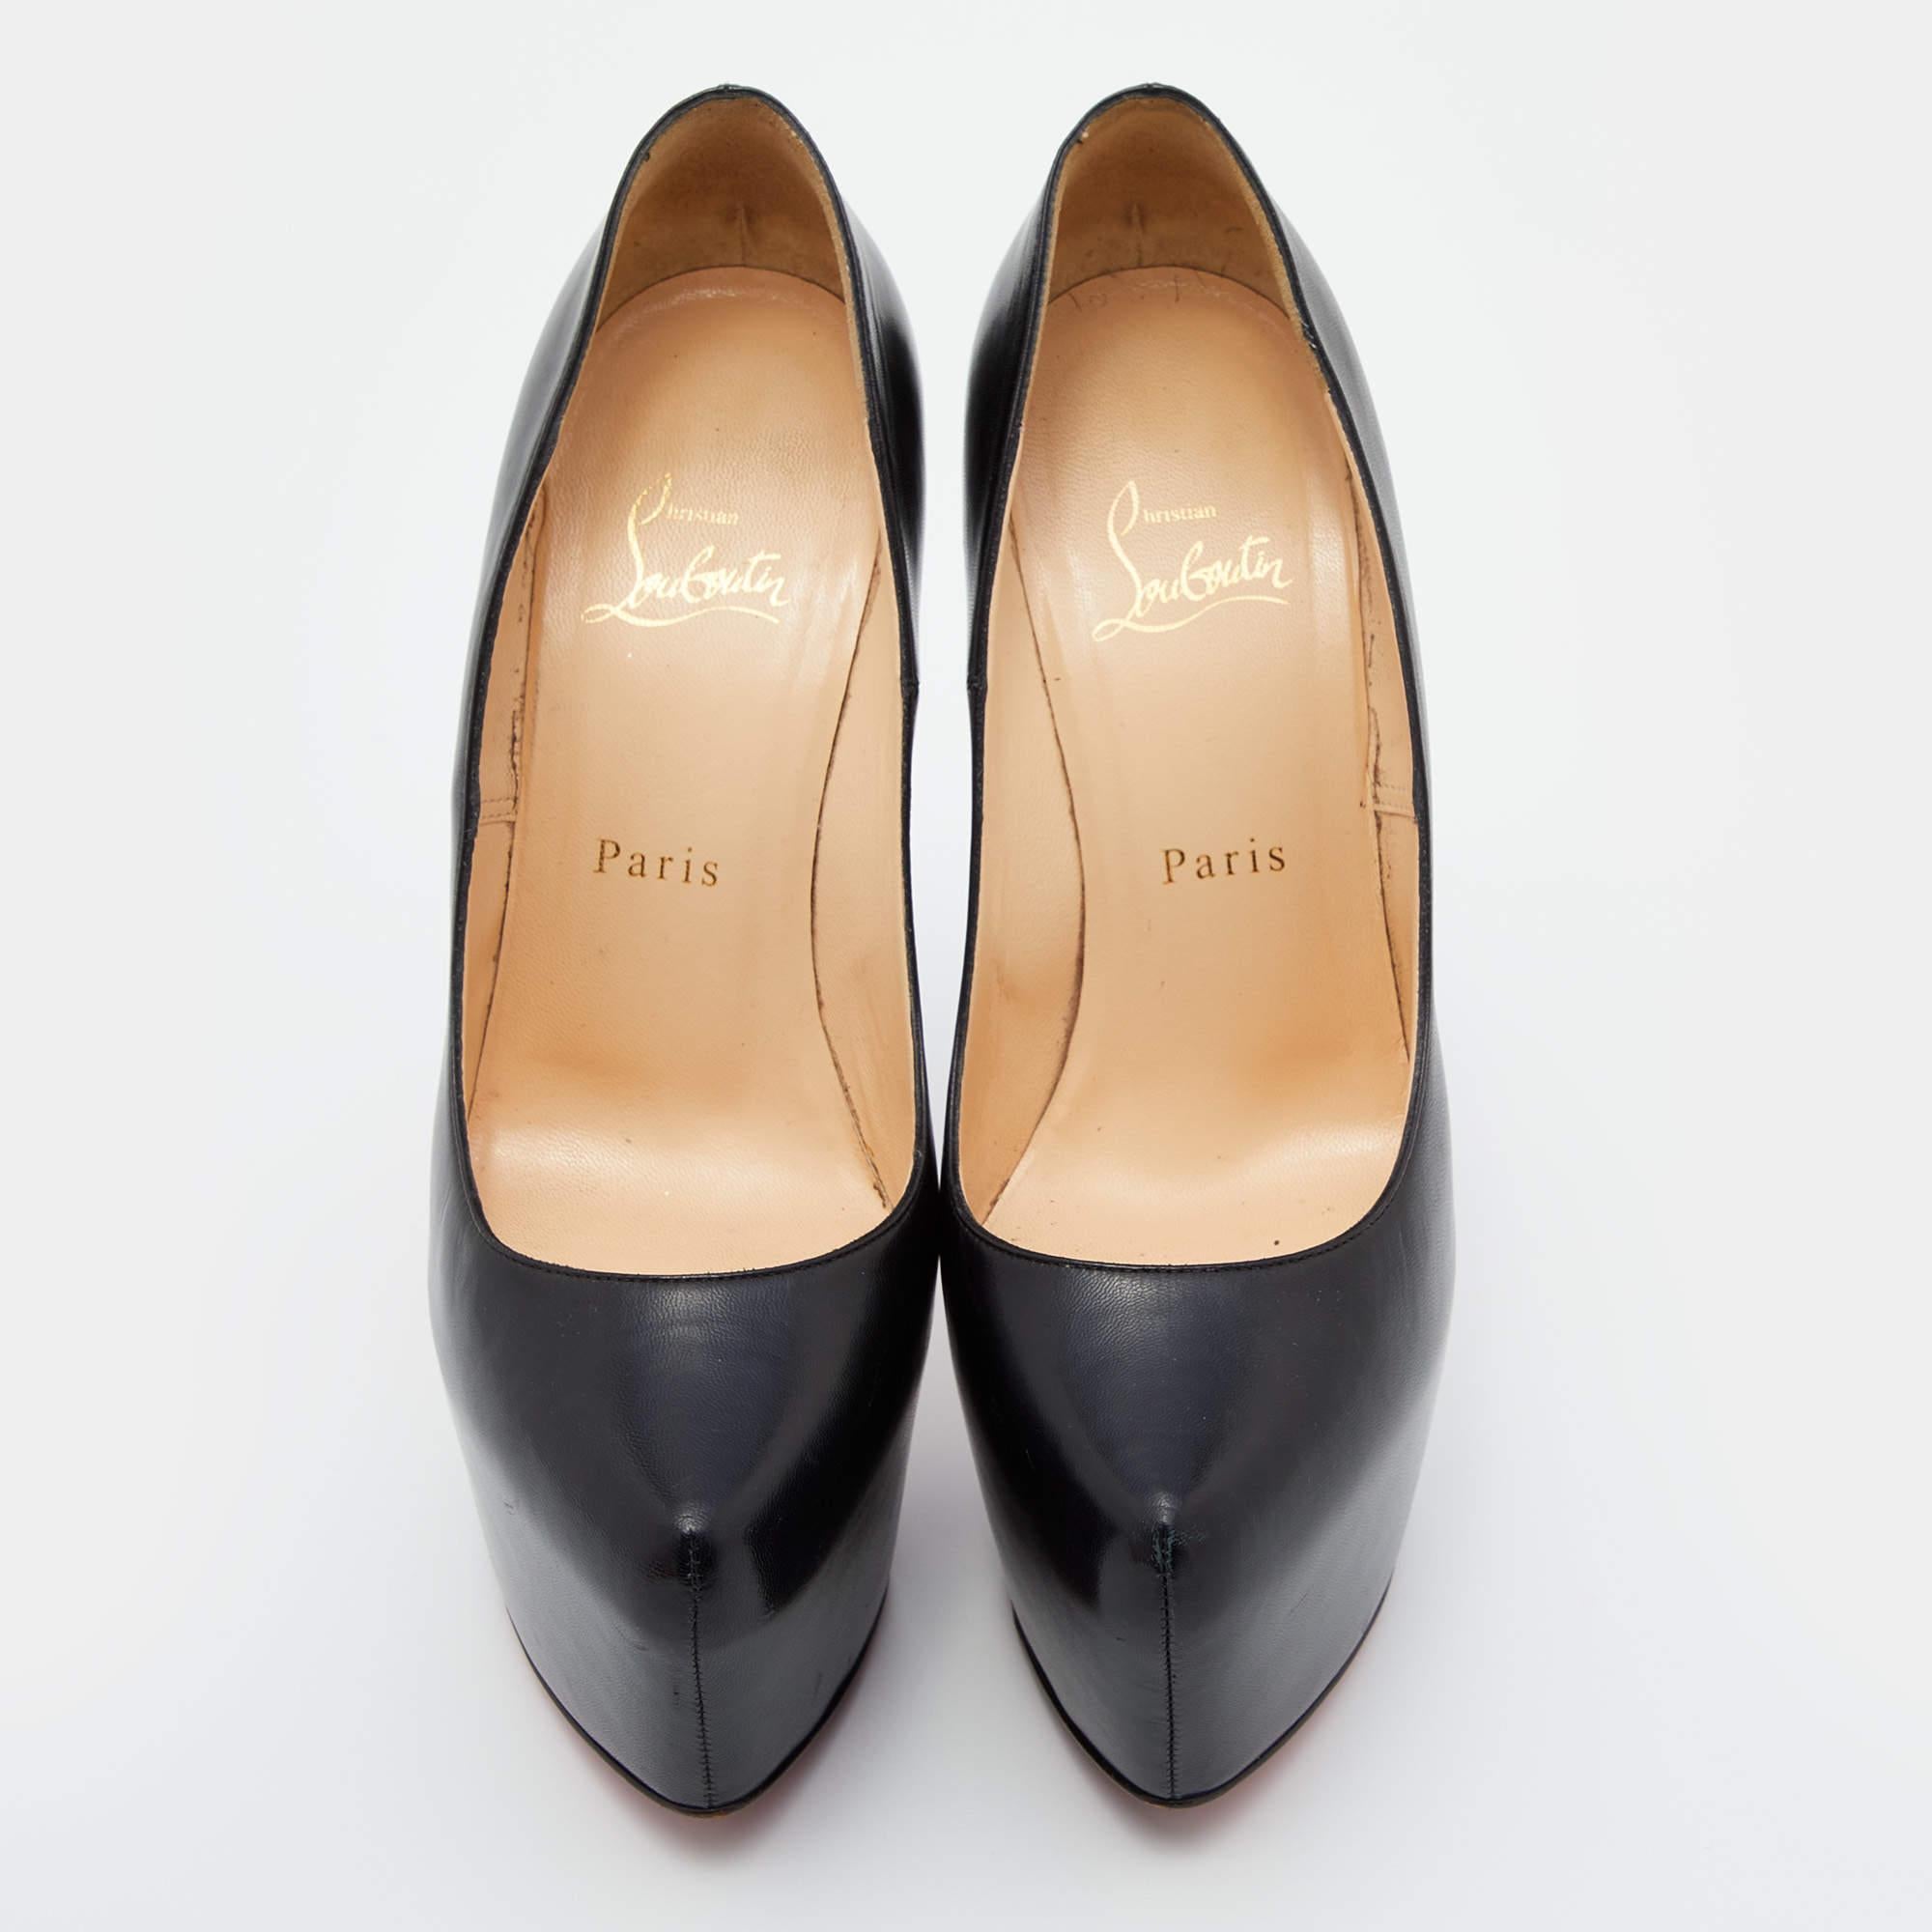 Exhibit a bold style with this pair of pumps. These branded shoes for women are crafted from quality materials. They are set on durable soles and sleek heels.

Includes: Original Dustbag
